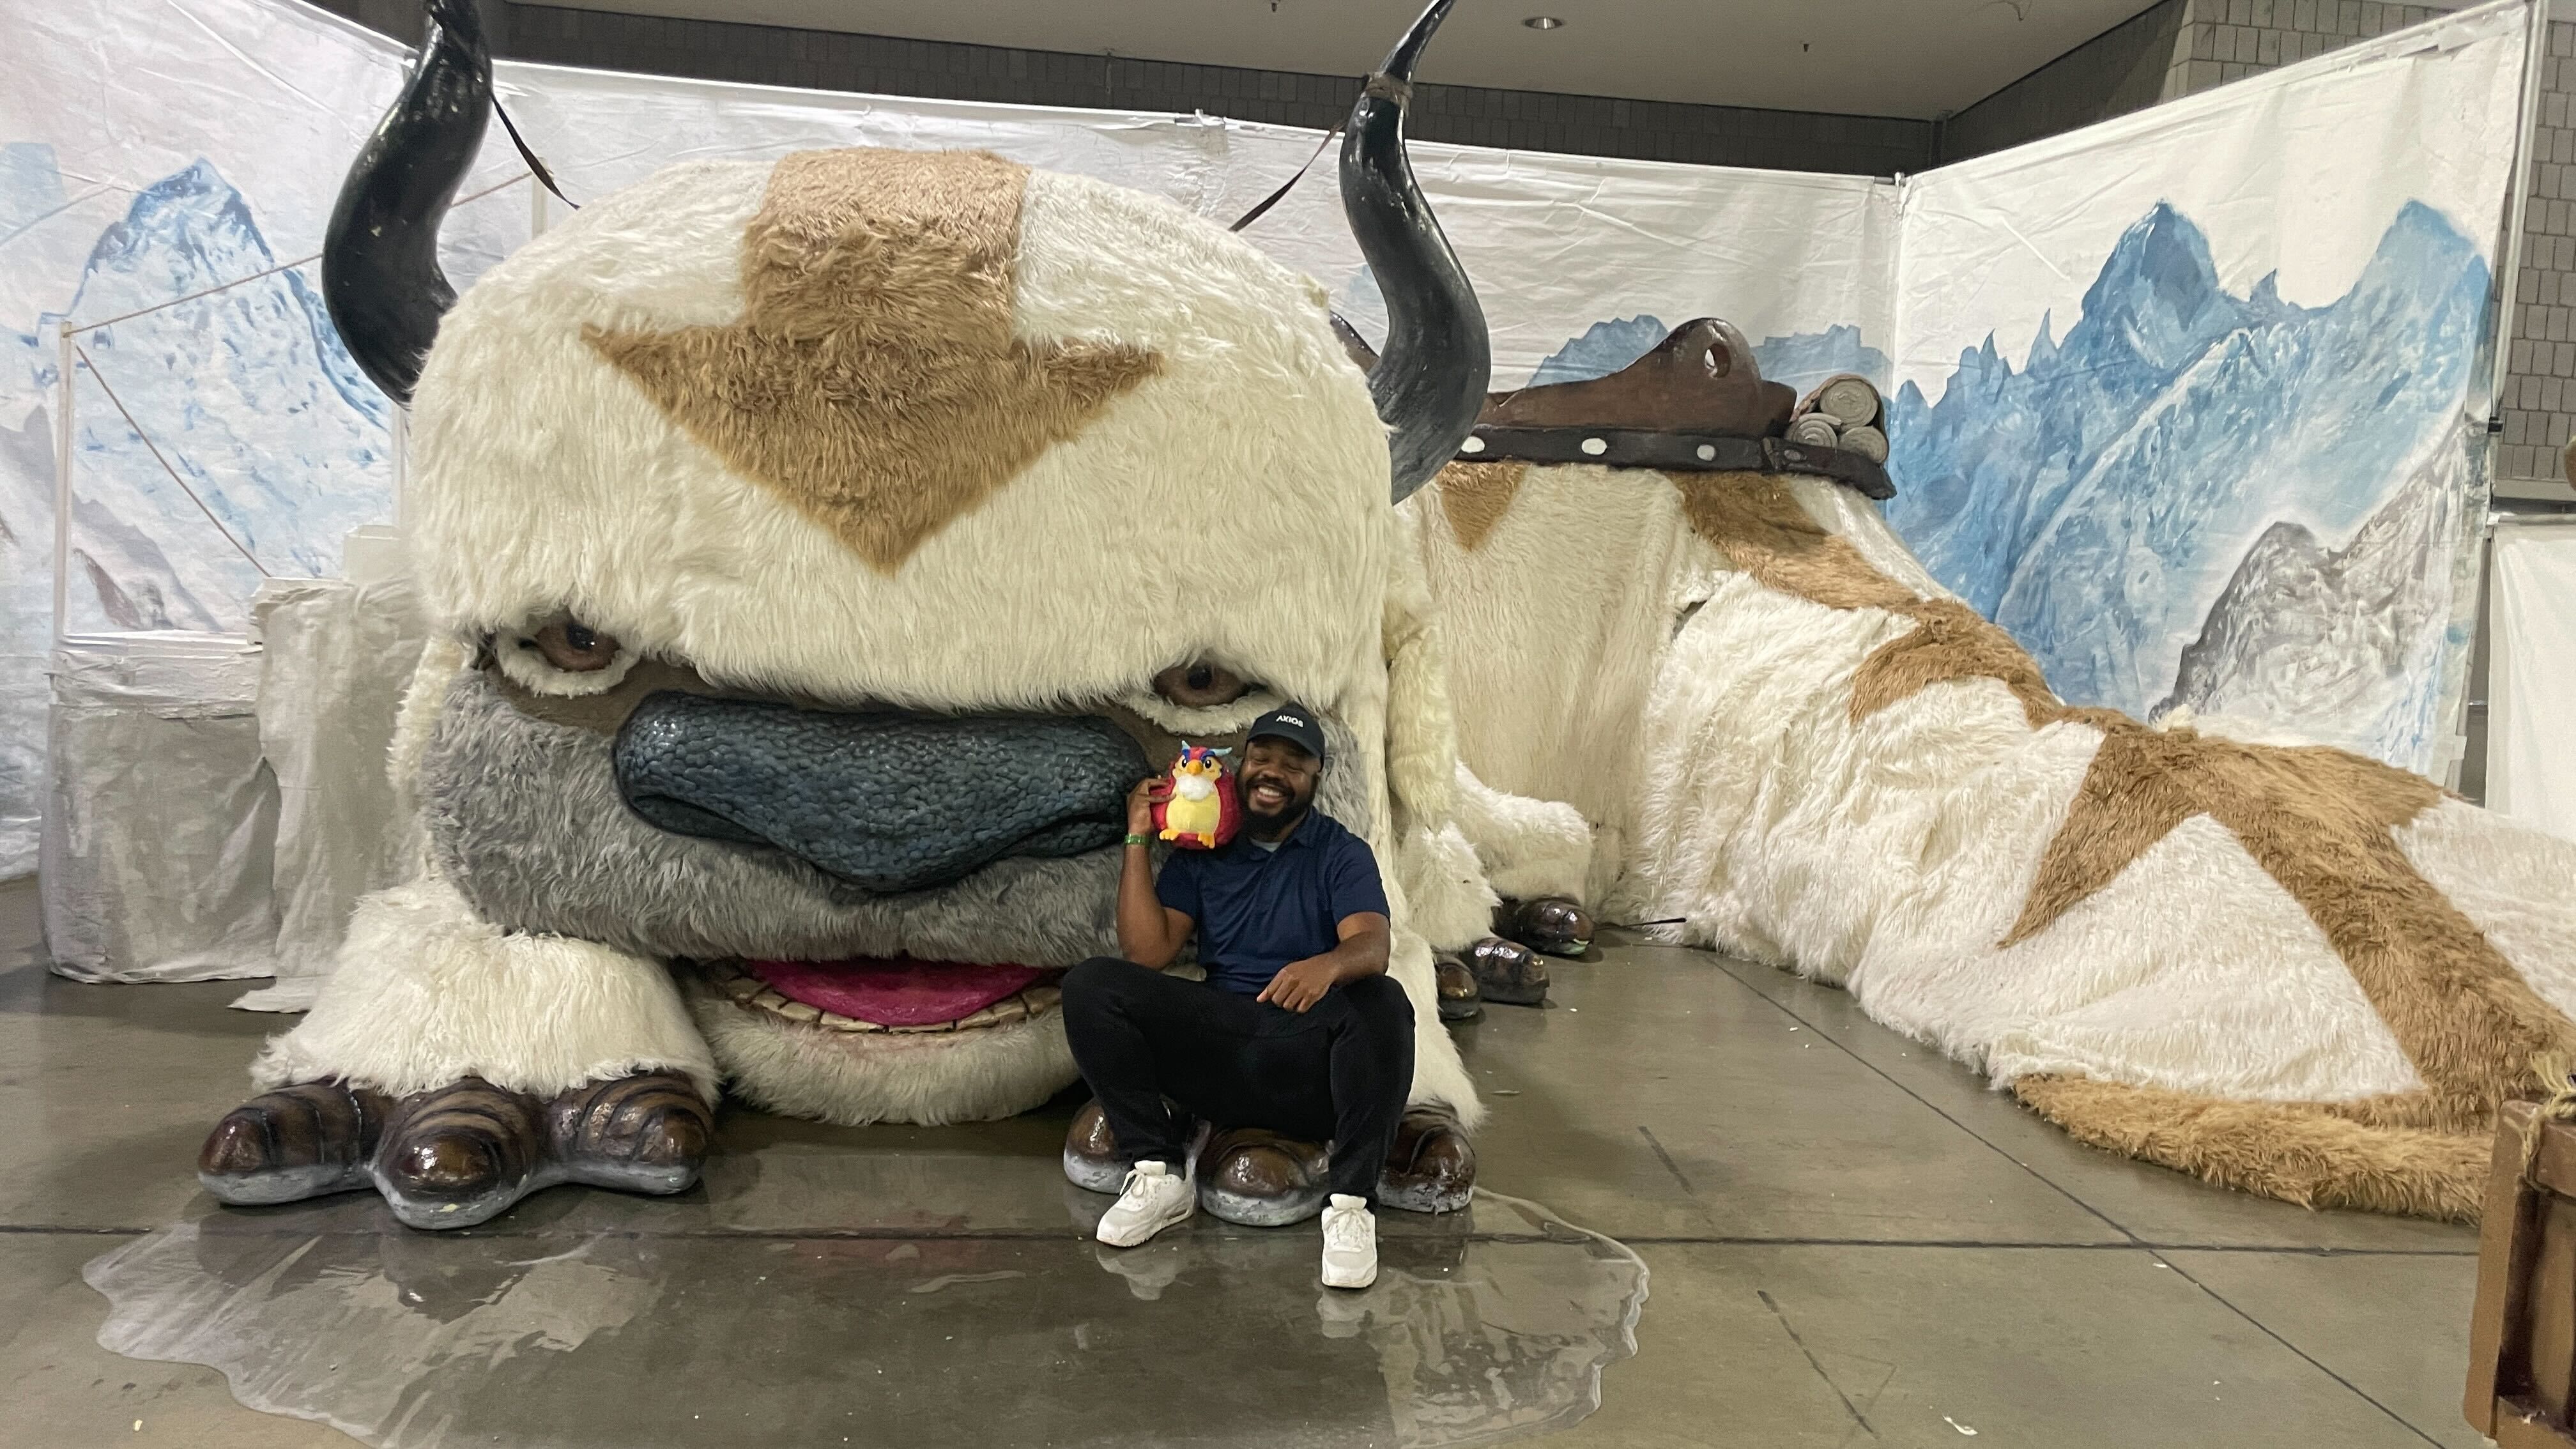 Axios's Wil Nobles and Phoenix 3000 pose with a life-sized version of the air bison Appa from "Avatar: The Last Airbender."